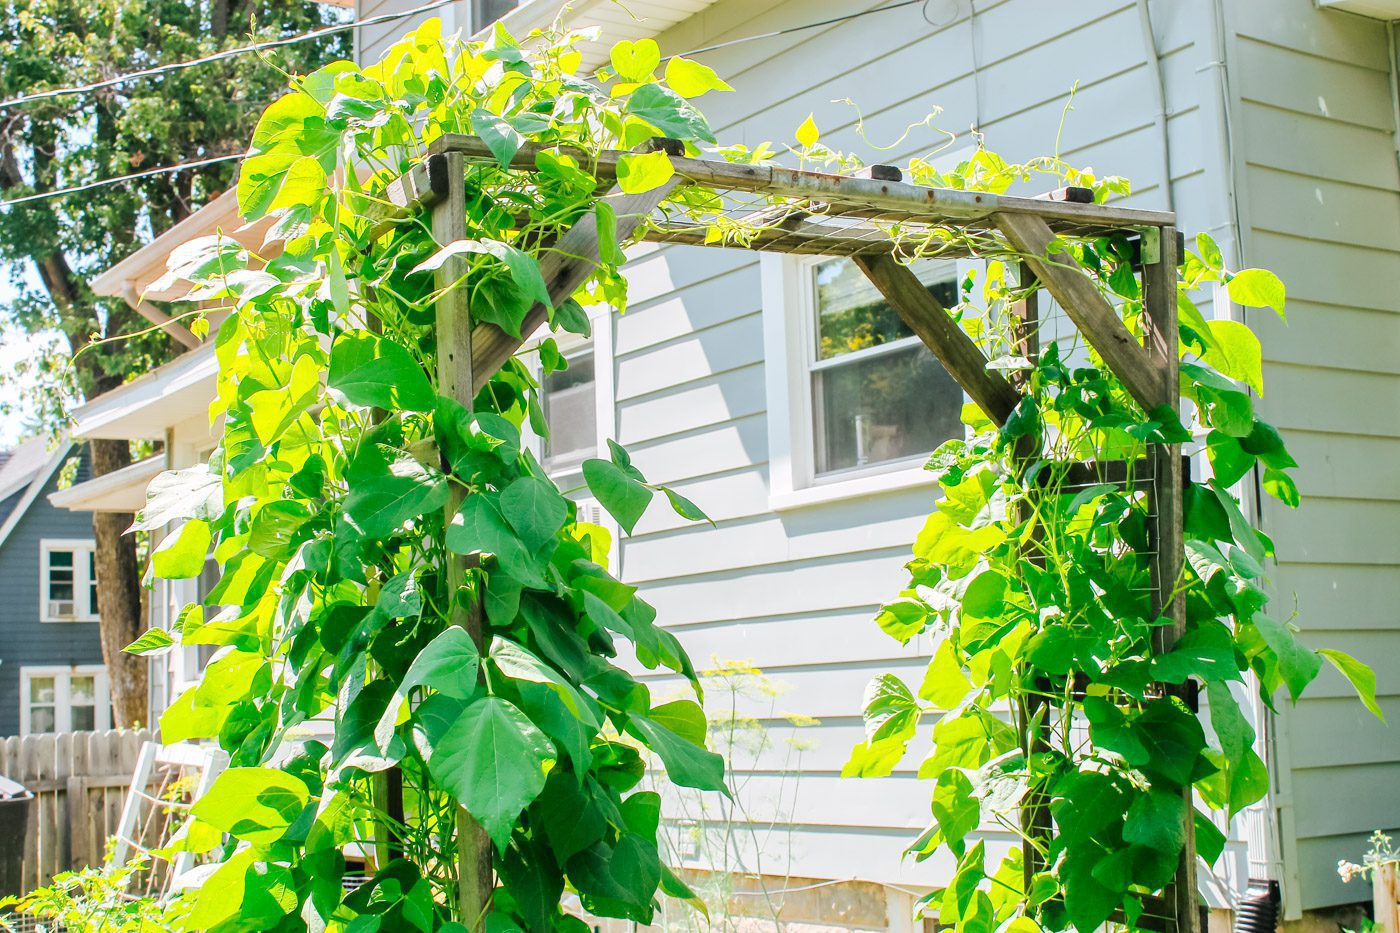 Vertical Gardening for Small Spaces